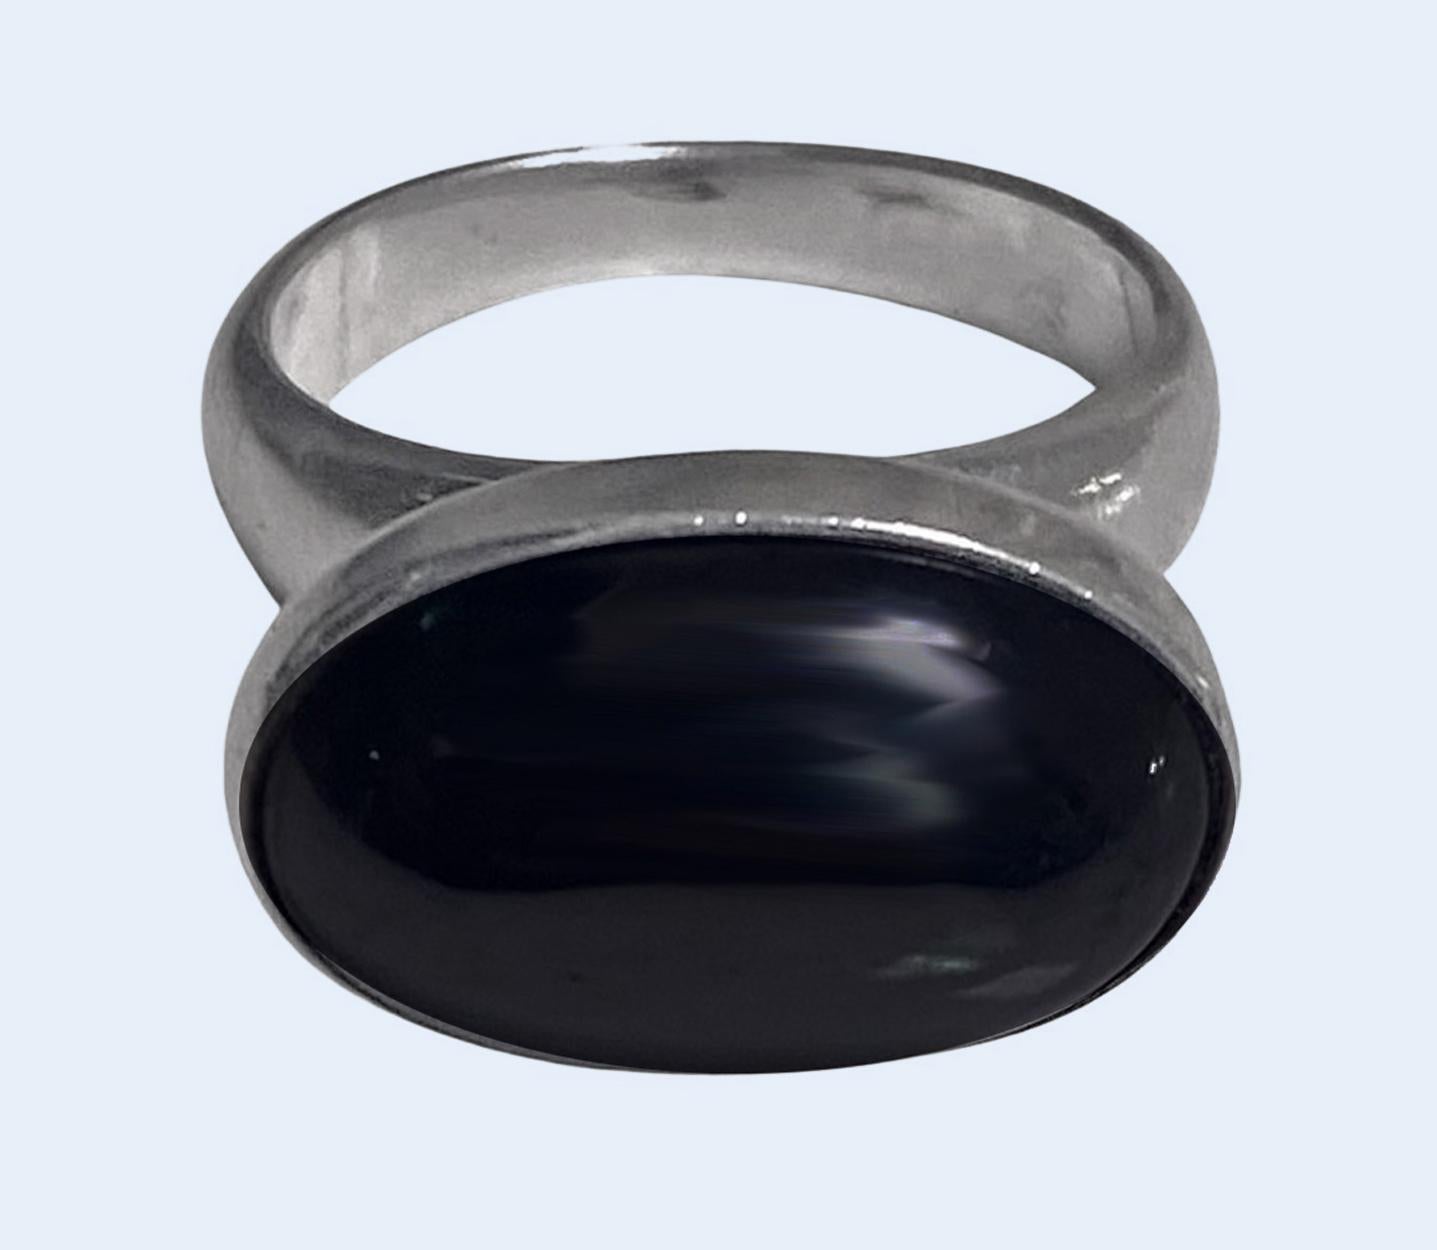 Georg Jensen Nanna Ditzel Ring C.1960 Hematite # 123B. Full Georg Jensen marks and number 123B,. Ring size 6.5. Item Weight: 9.43 grams. Reflections from photography only. Very nice condition.